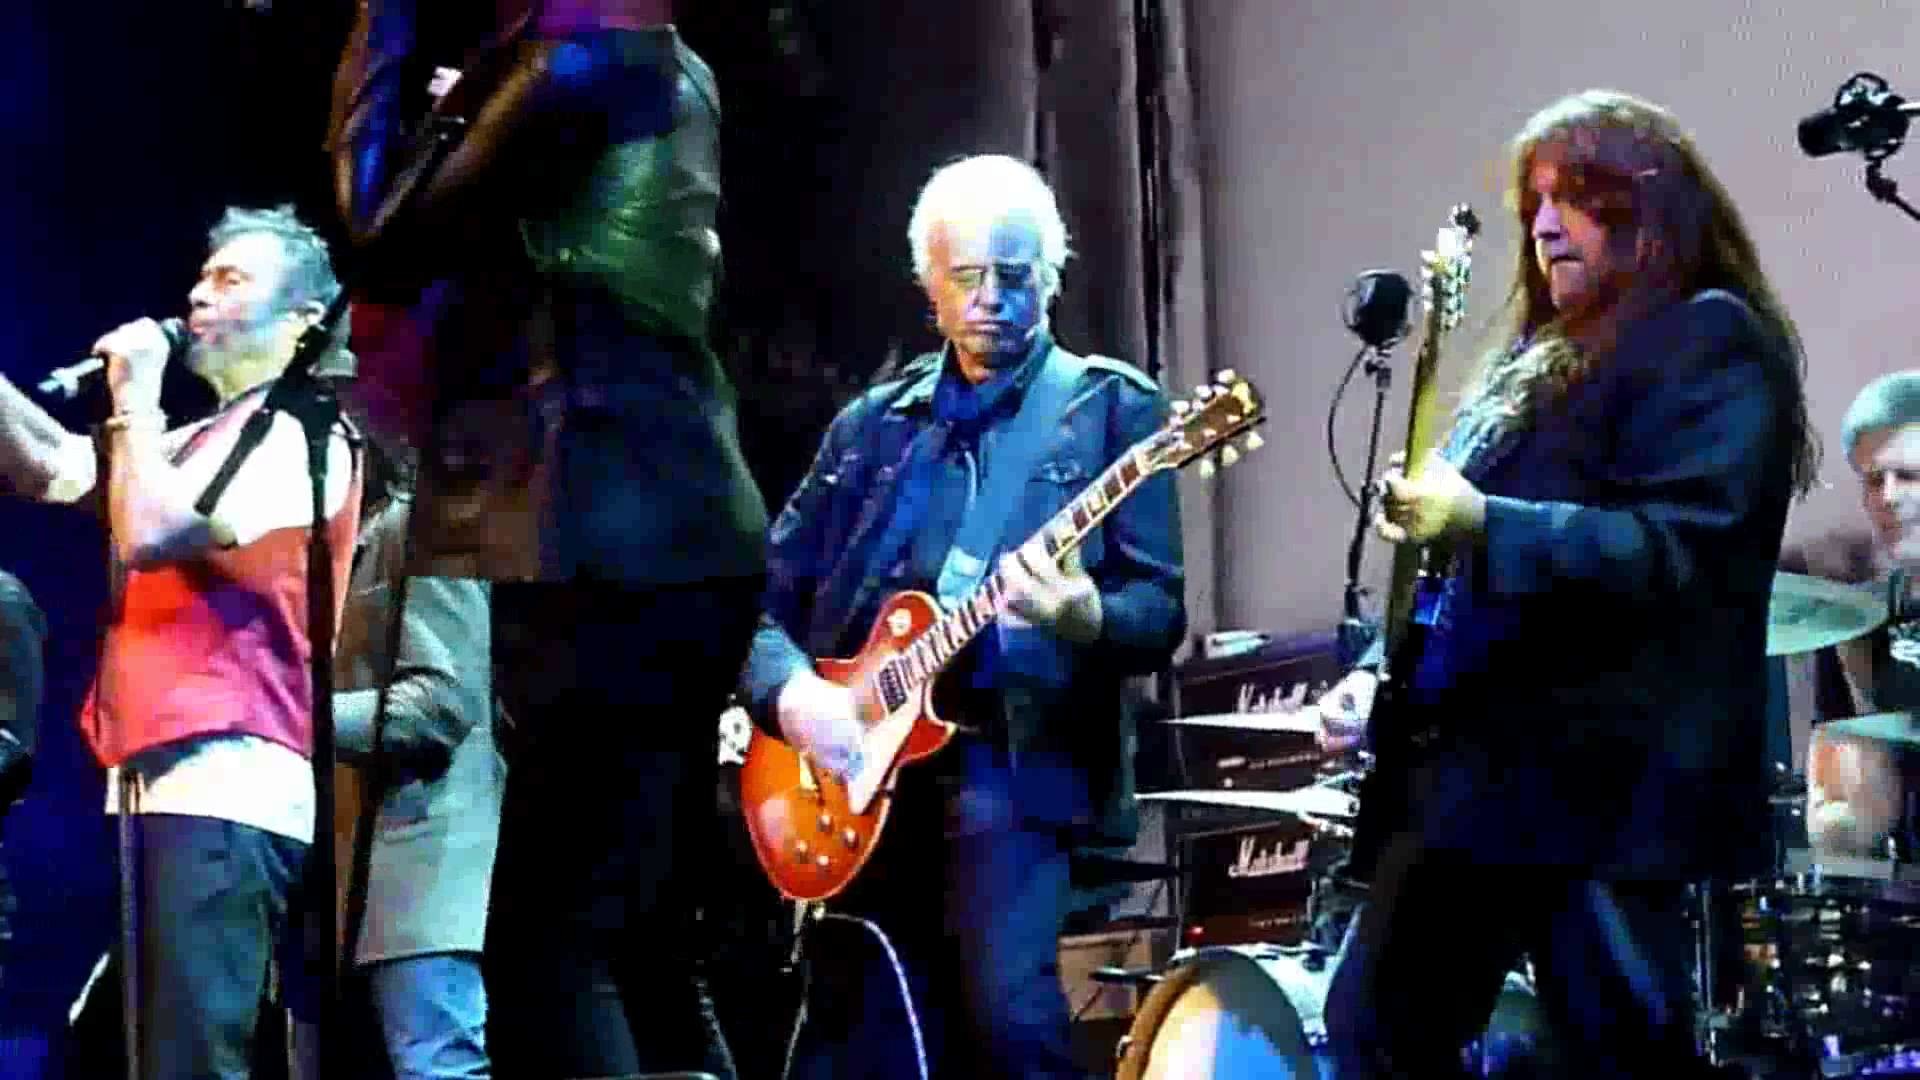 1920x1080 Jimmy Page Founders Award - Seattle 11-19-15 Jimmy gets onstage at end